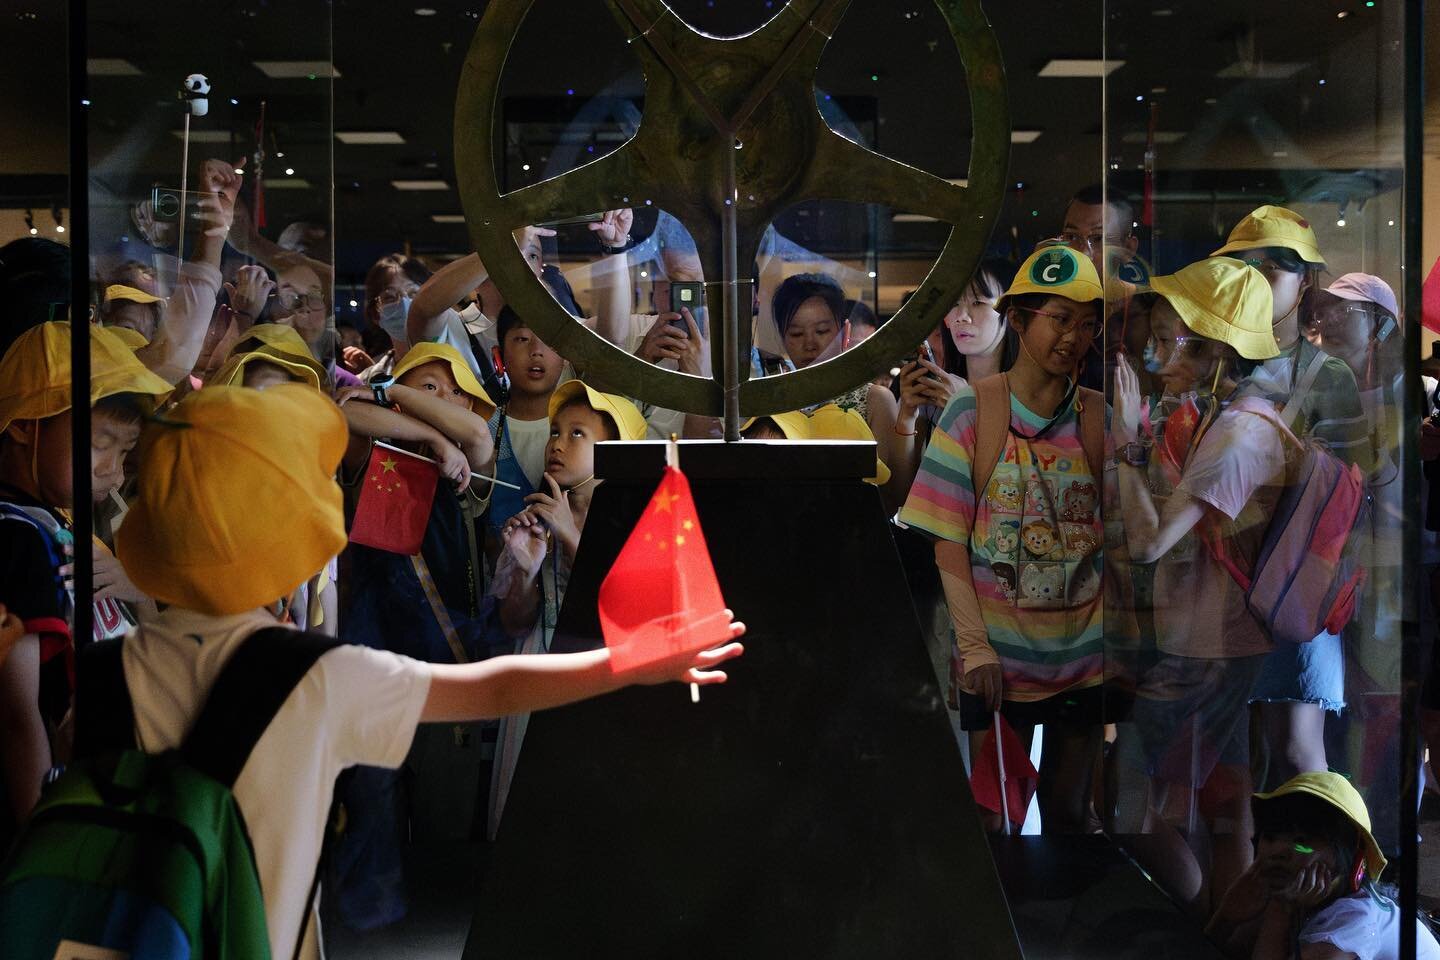 Young students holding Chinese flags surround the Shang Bronze Sun-Shaped Object, a grade-one Chinese national treasure excavated from the Sanxingdui ruins, in Sichuan&rsquo;s Sanxingdui Museum on August 15, 2023. 

#scmp #scmpnews 
#videojournalism 